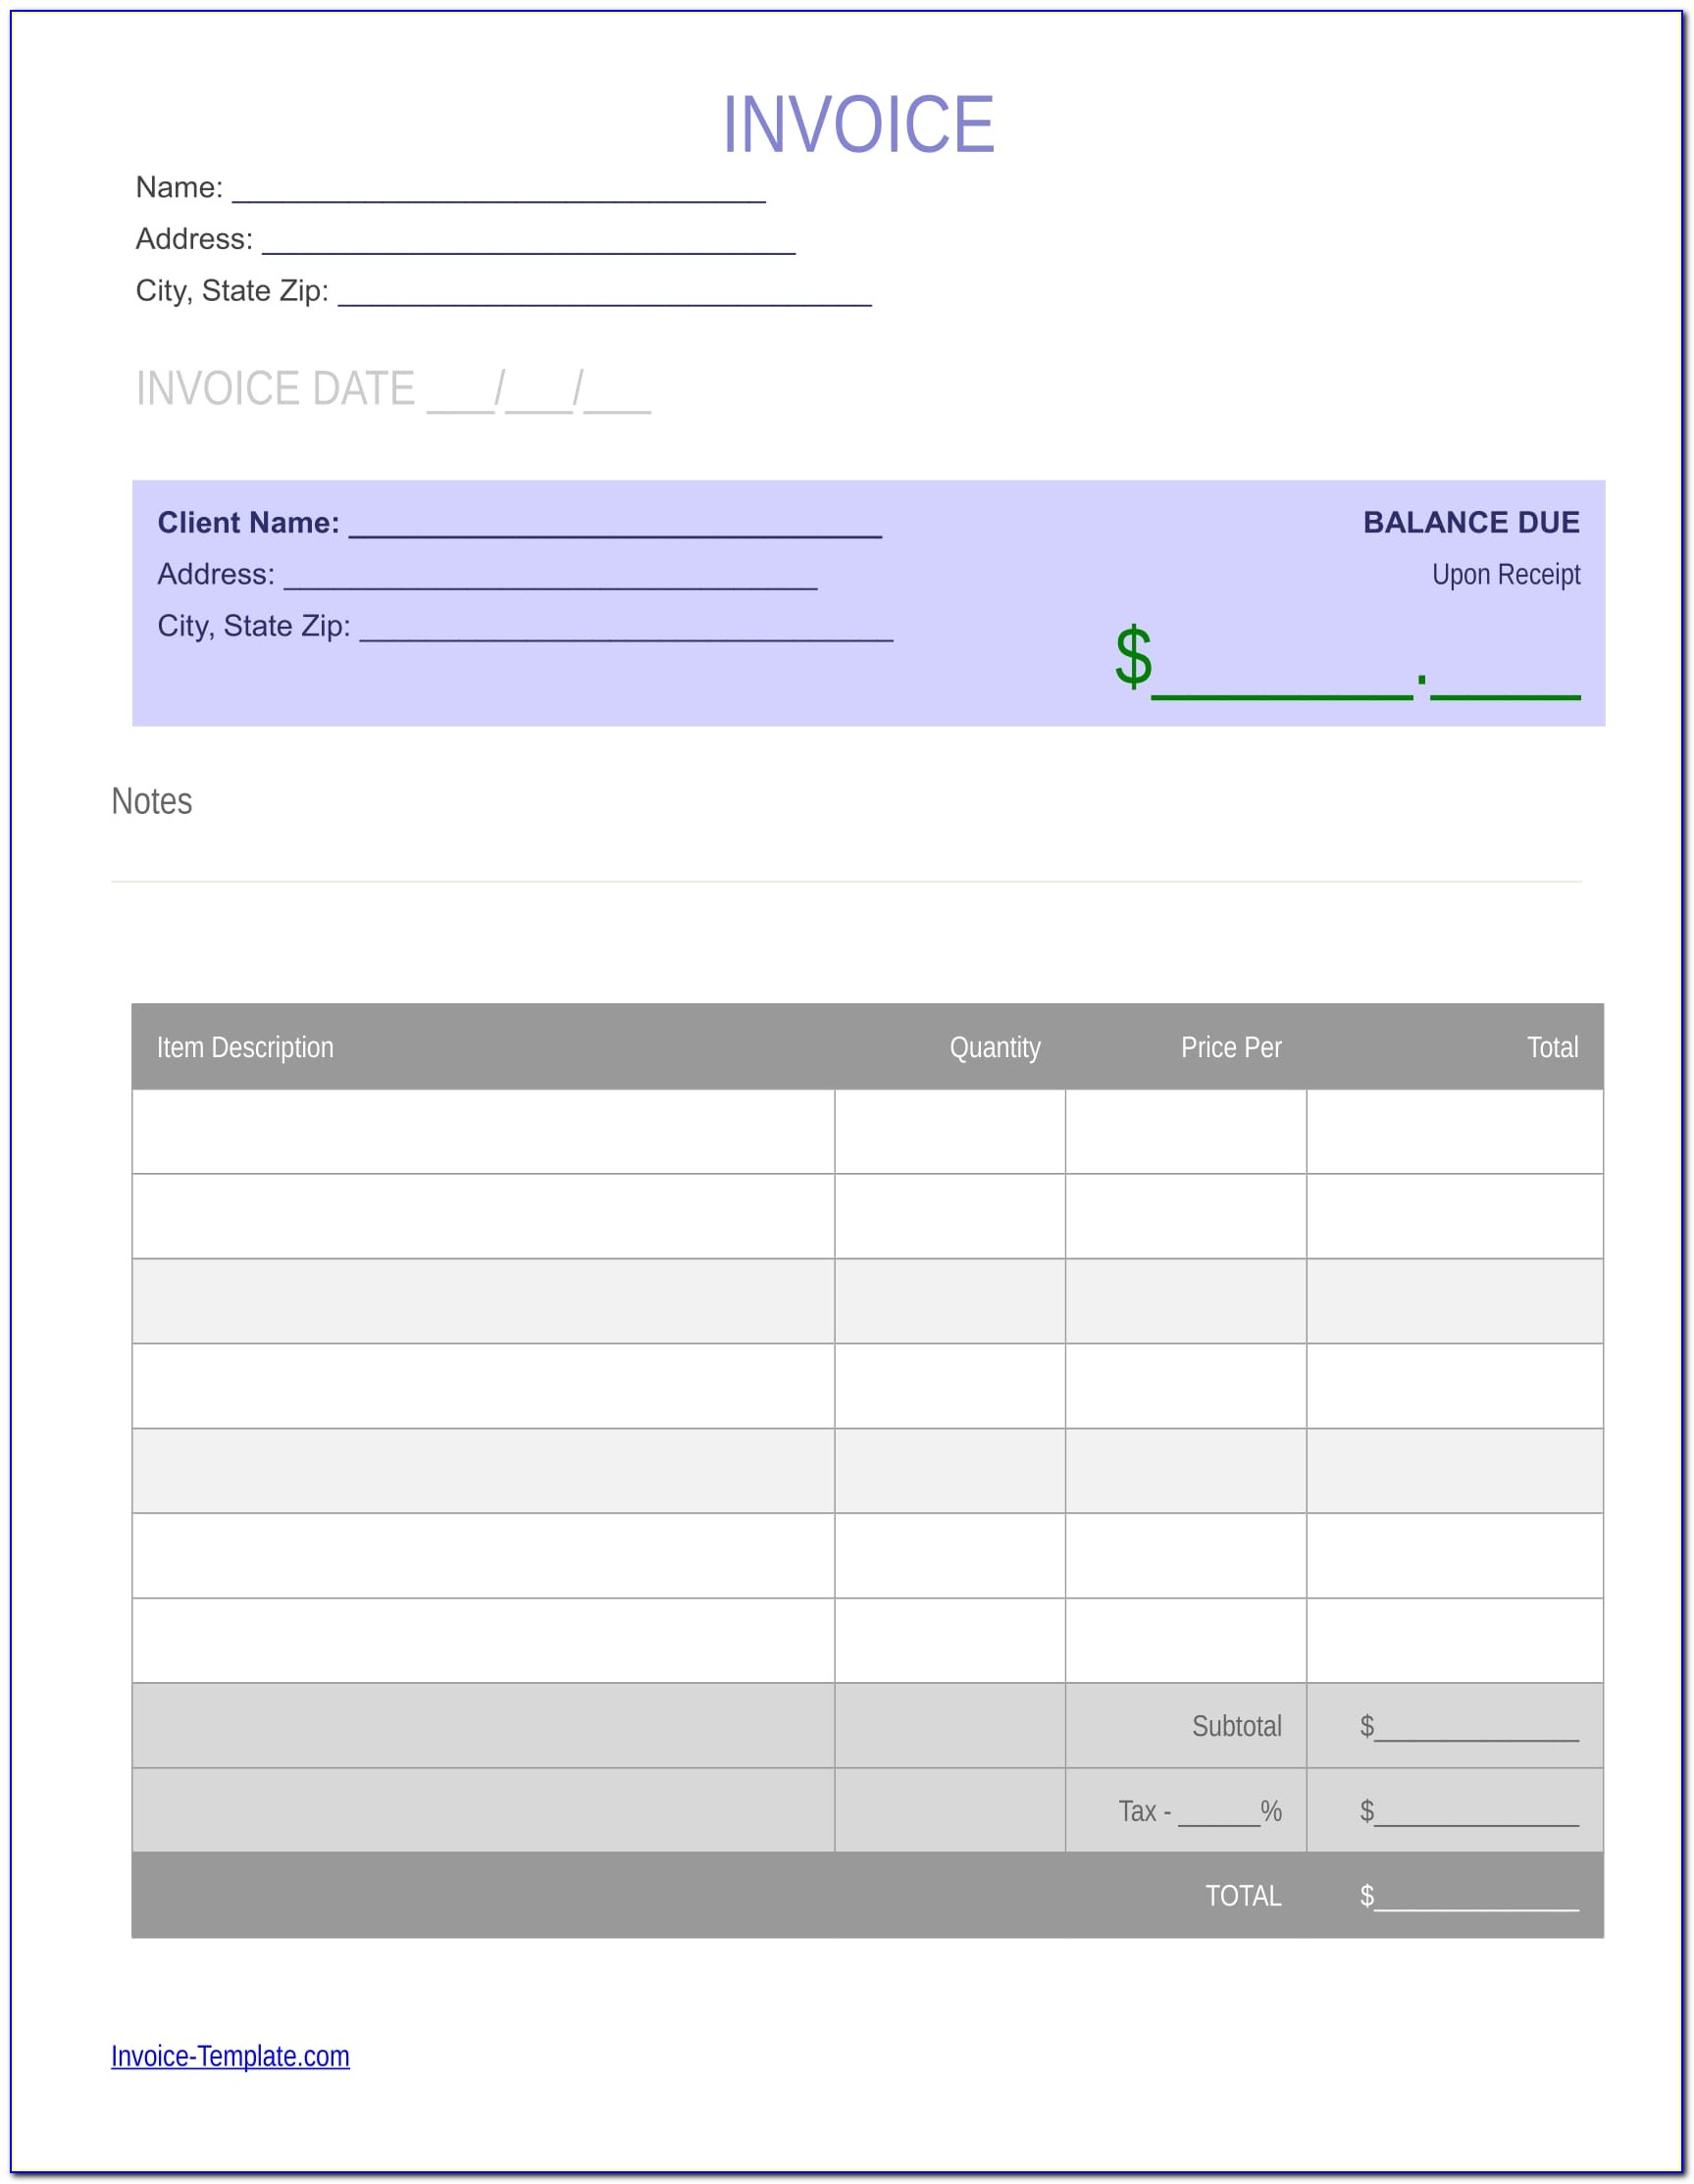 Pictures Of Blank Invoices